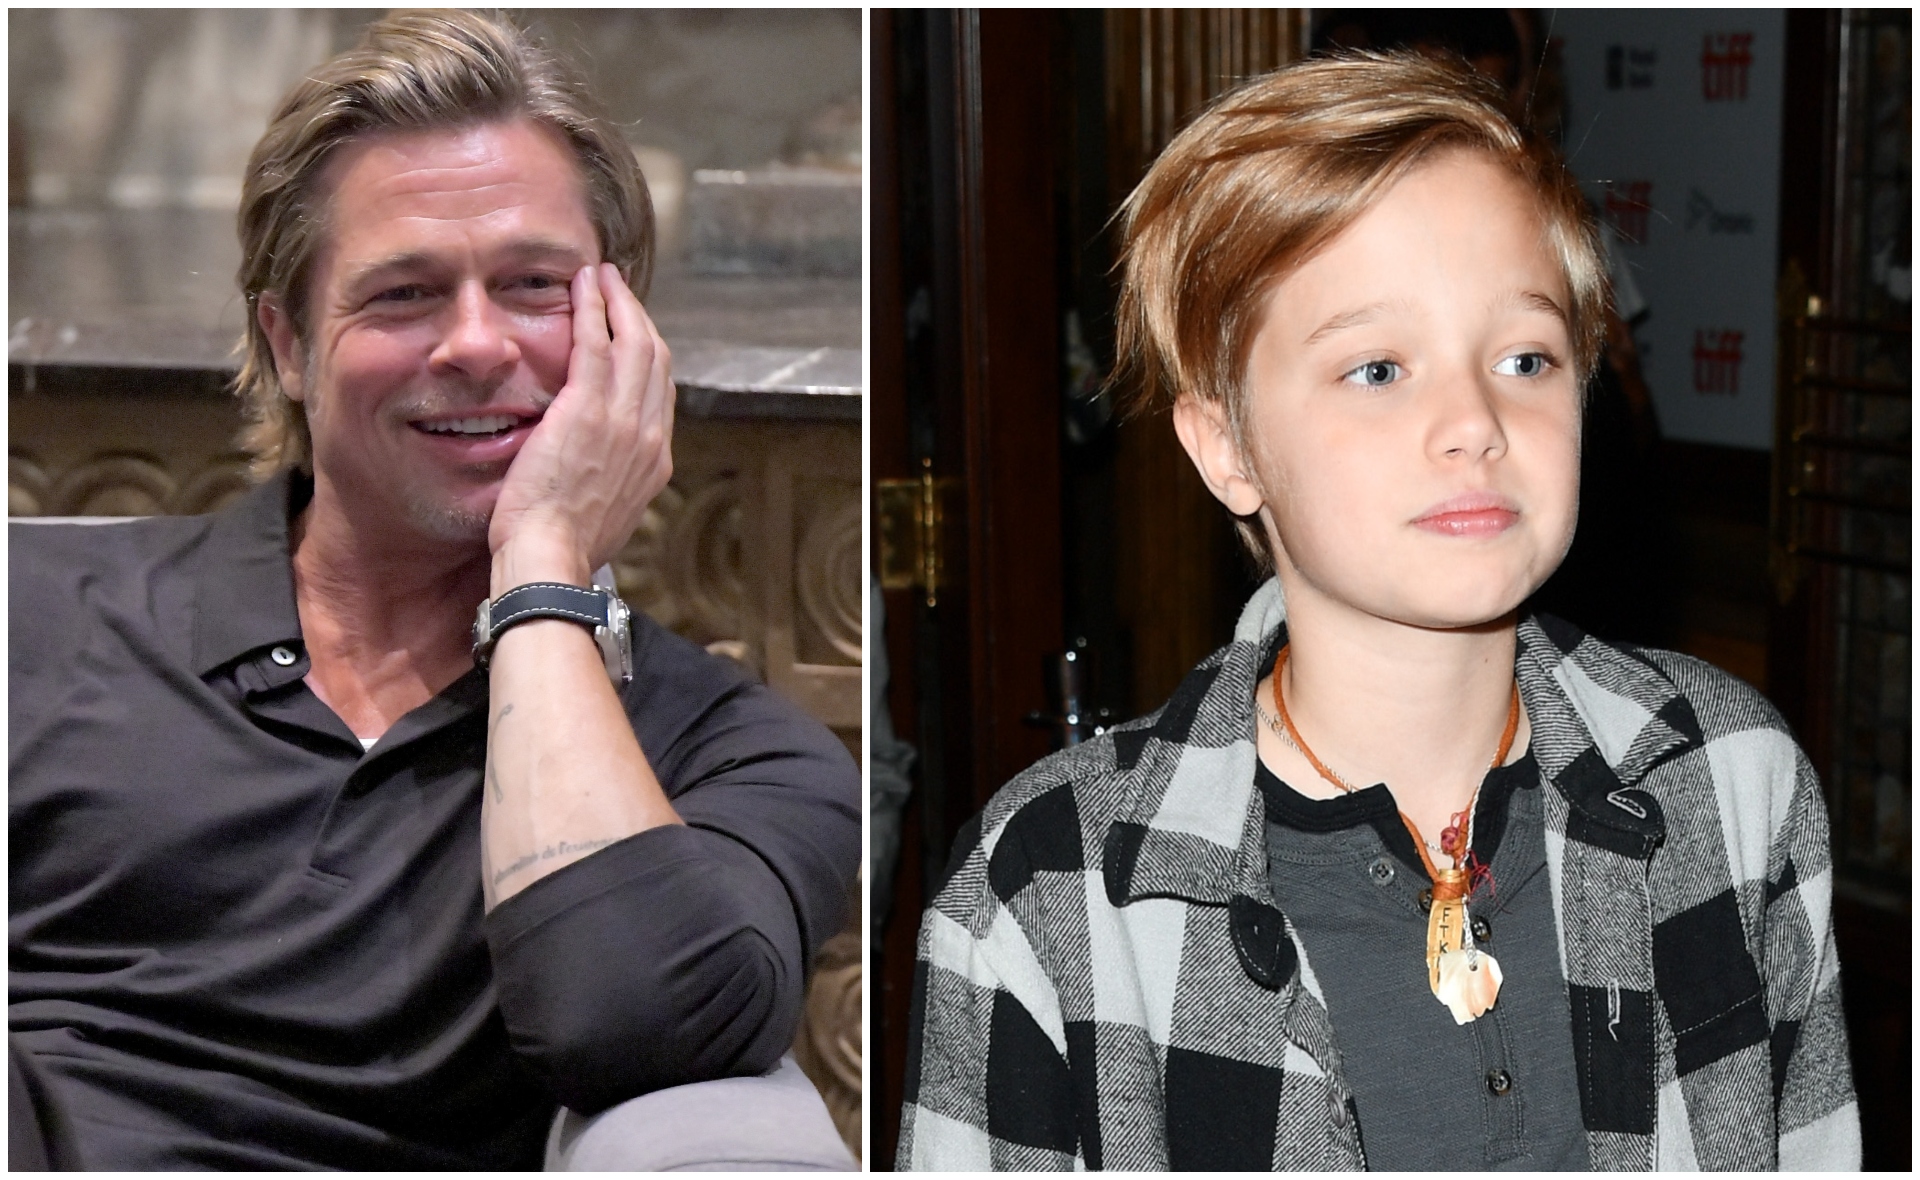 Brad Pitt and Shiloh Jolie-Pitt may live together again as his battle with Angelina takes a surprising turn